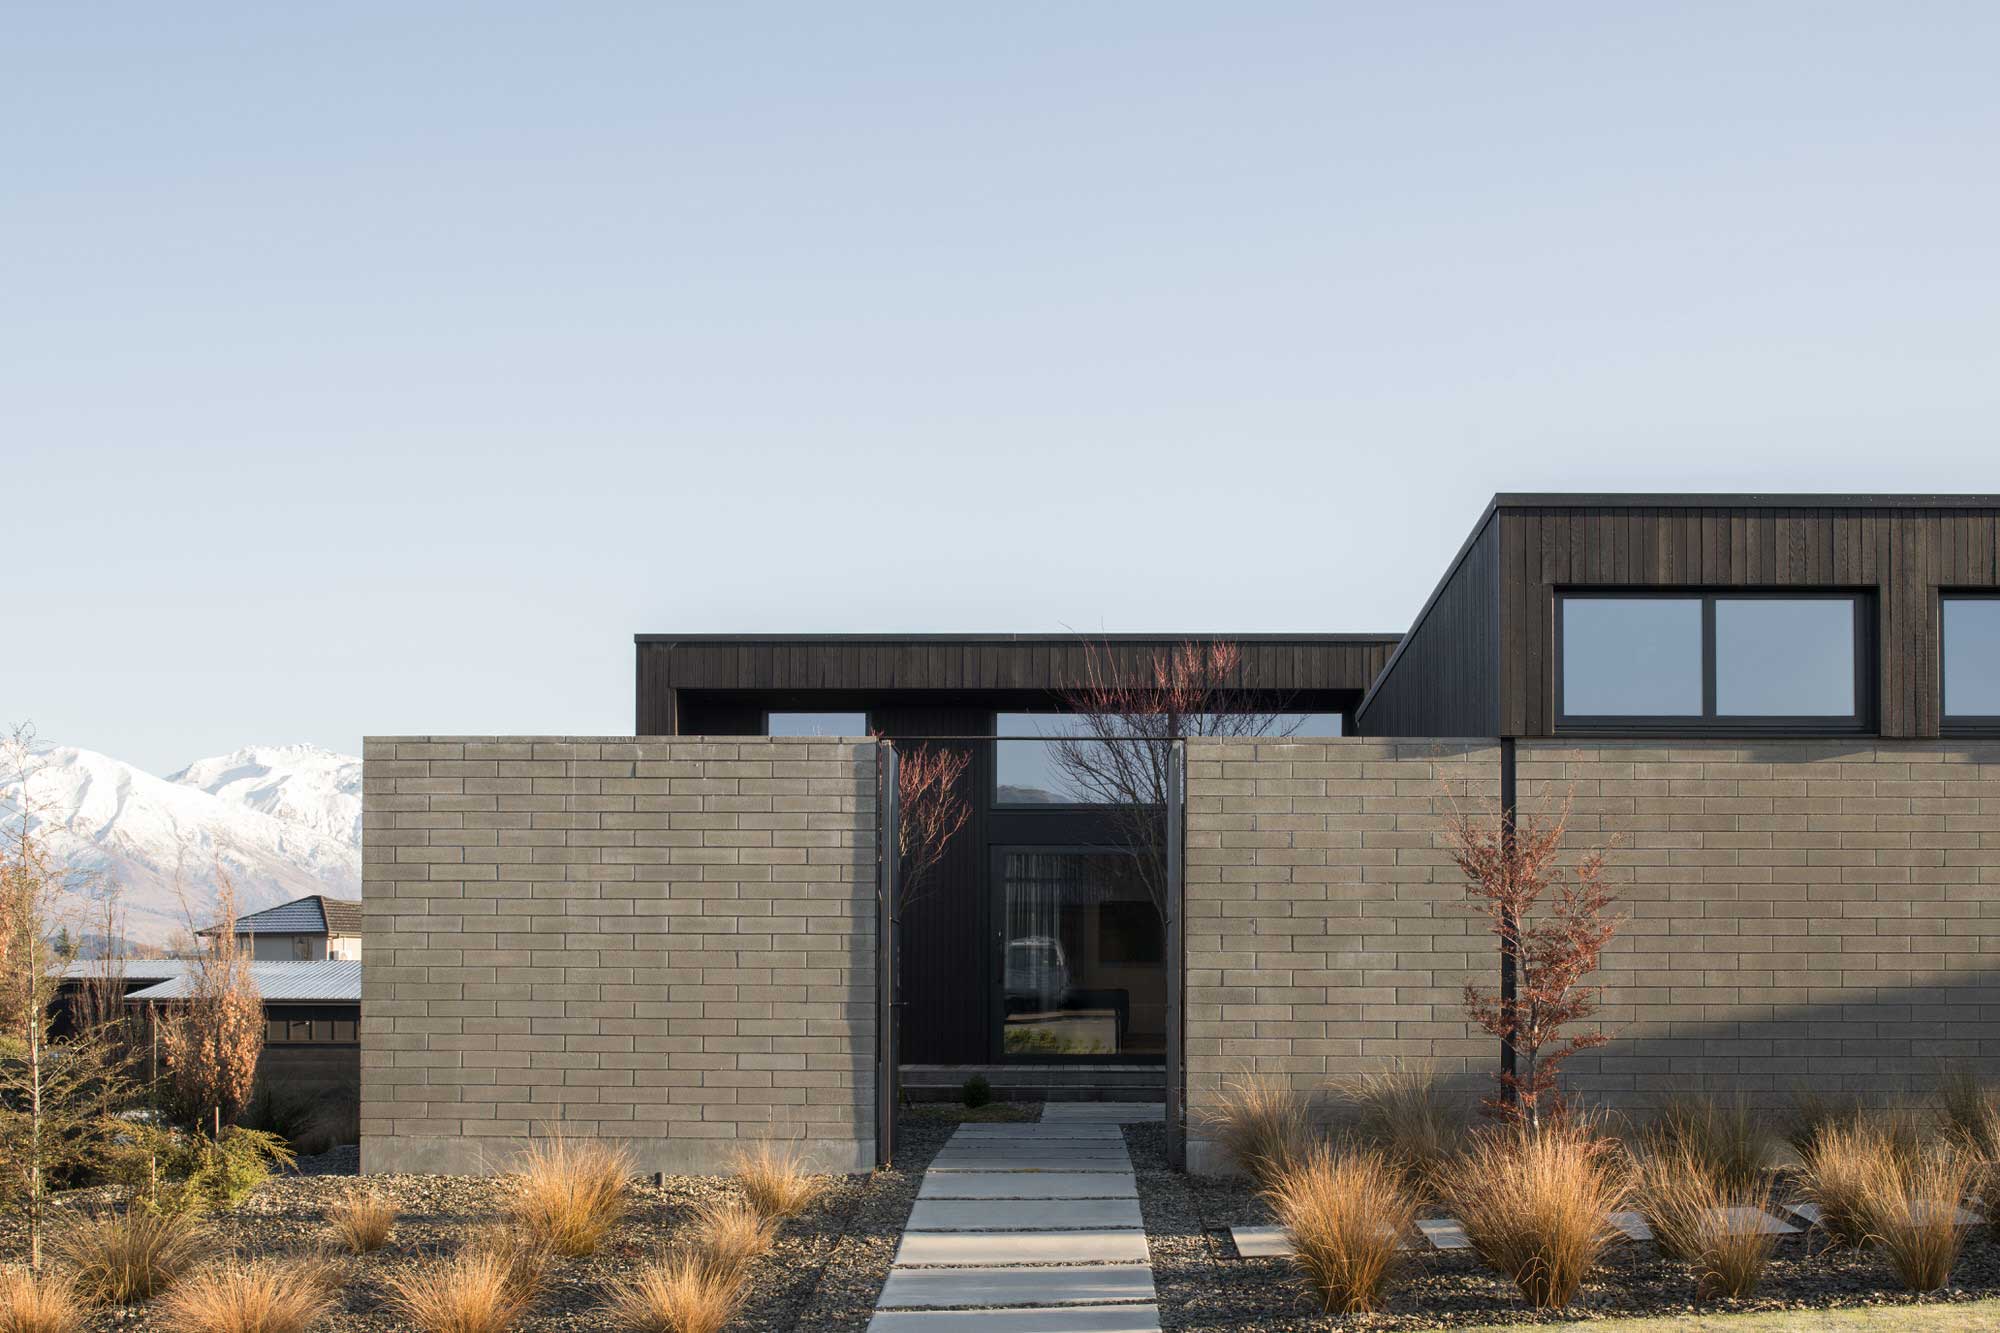 Rafe Maclean 
Architects Owens House